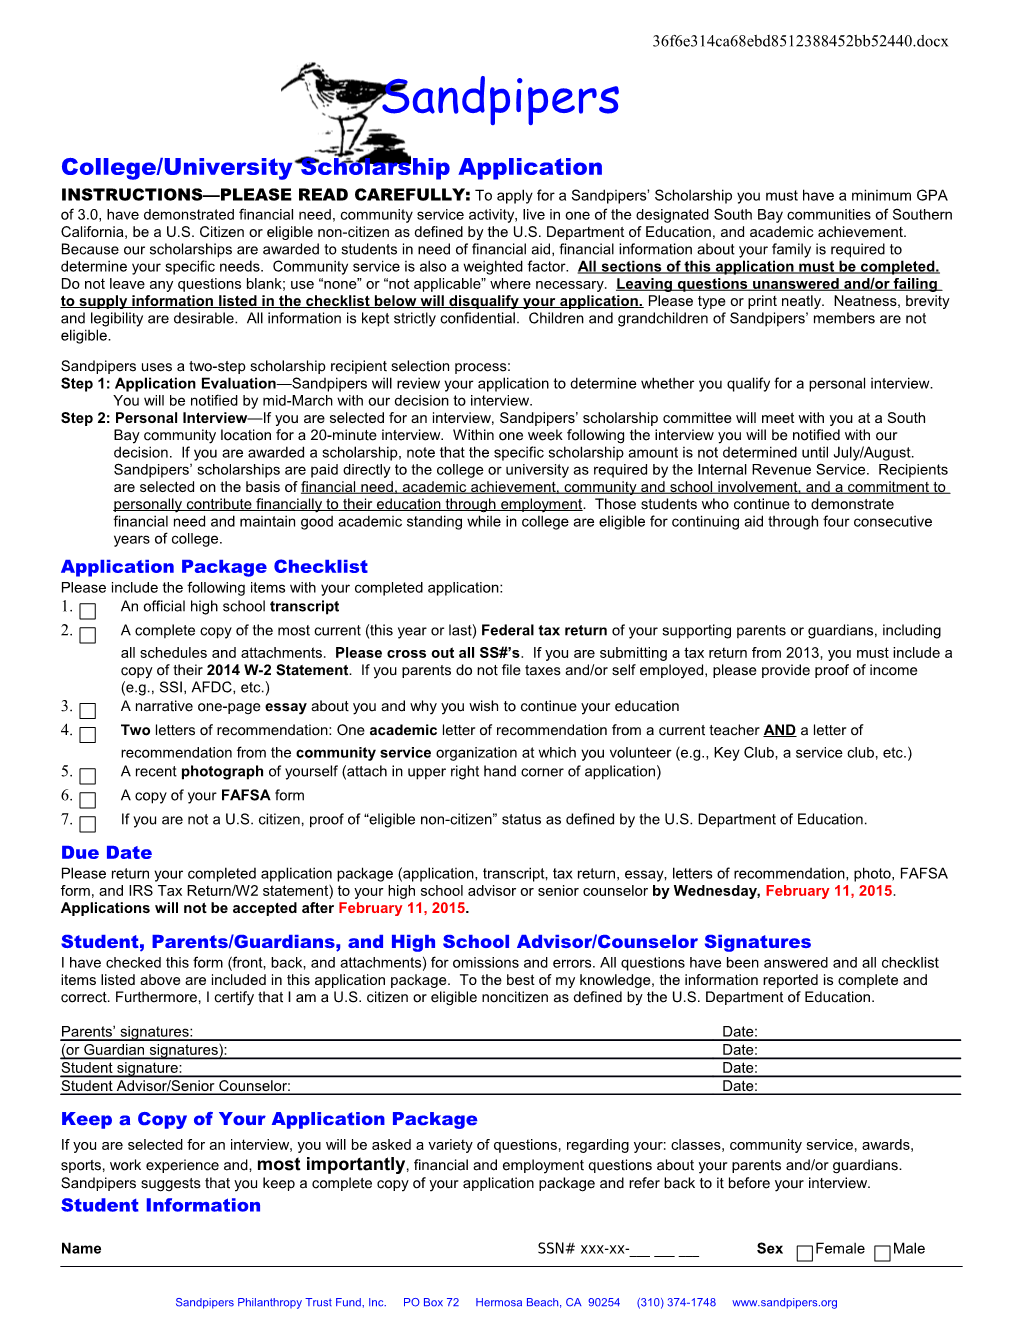 Sandpipers Scholarship Application